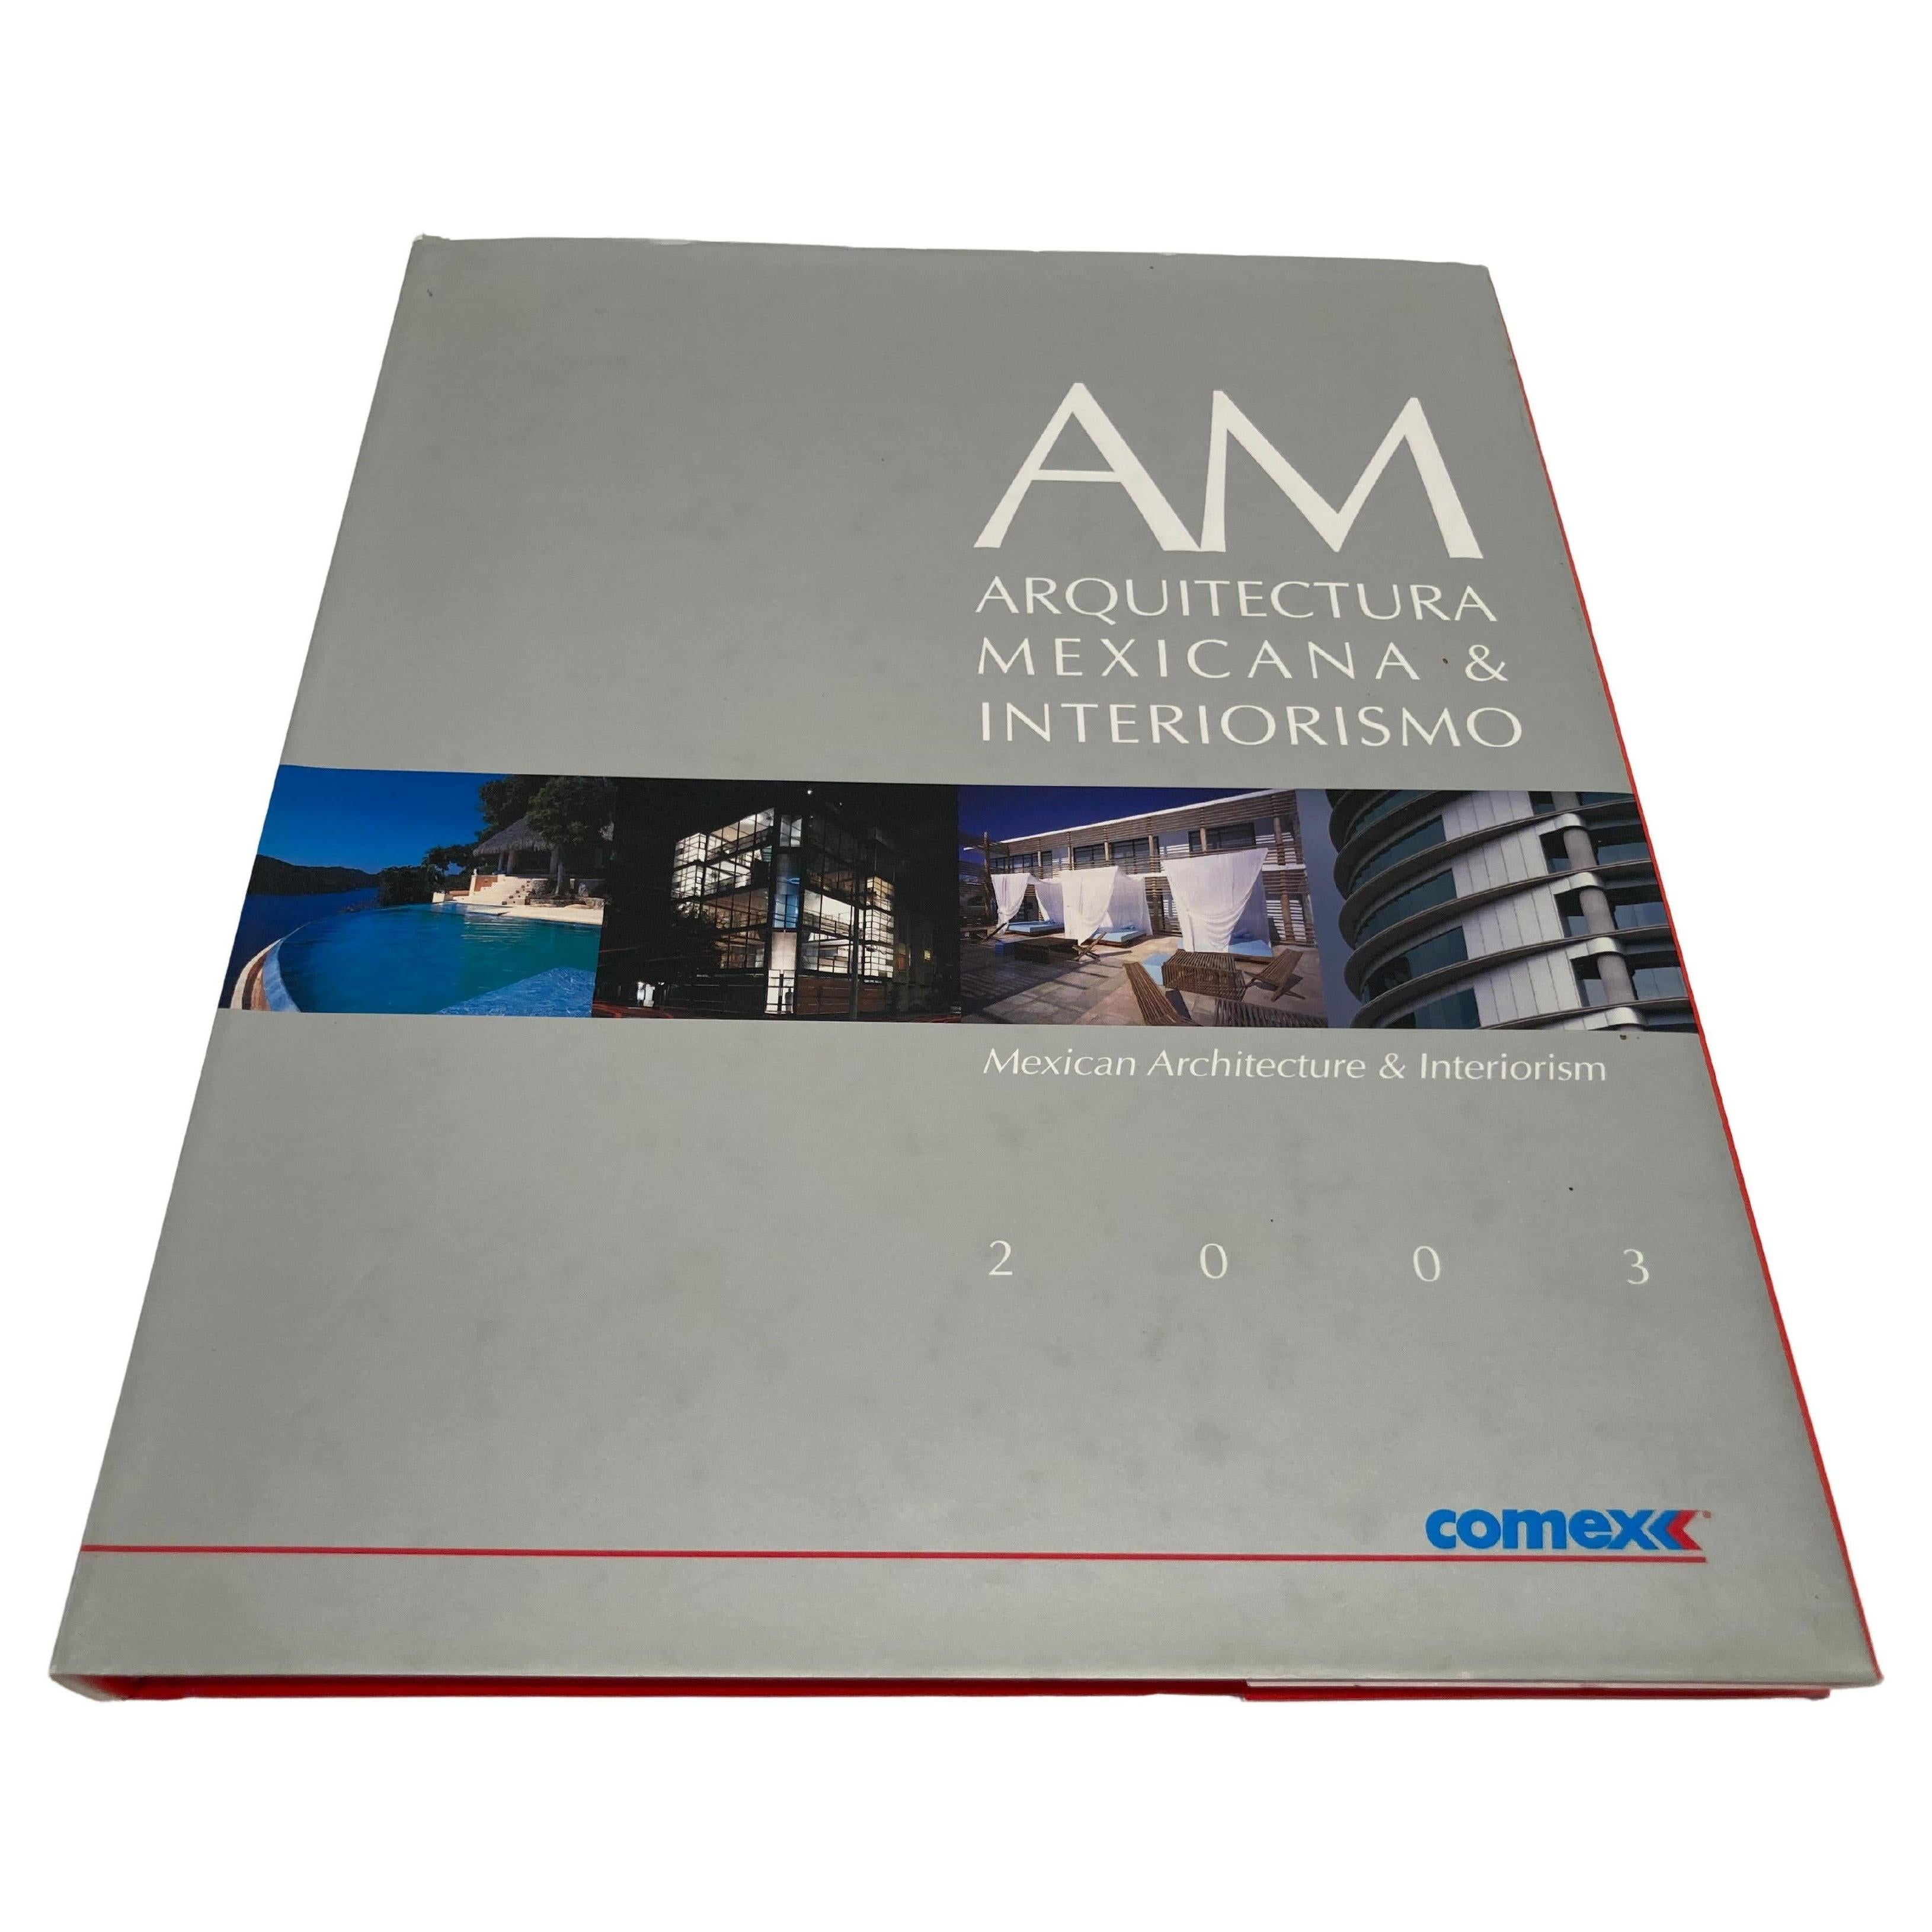 A M Arquitectura Mexicana Interiorismo Comex 2003 Harcover Book.
Text in Spanish and English.
Great book on Architecture in Mexico
Place Of Publication Mexico City
Date Published 2003
Format: Hardcover 
Topic: Interior Design, Architecture